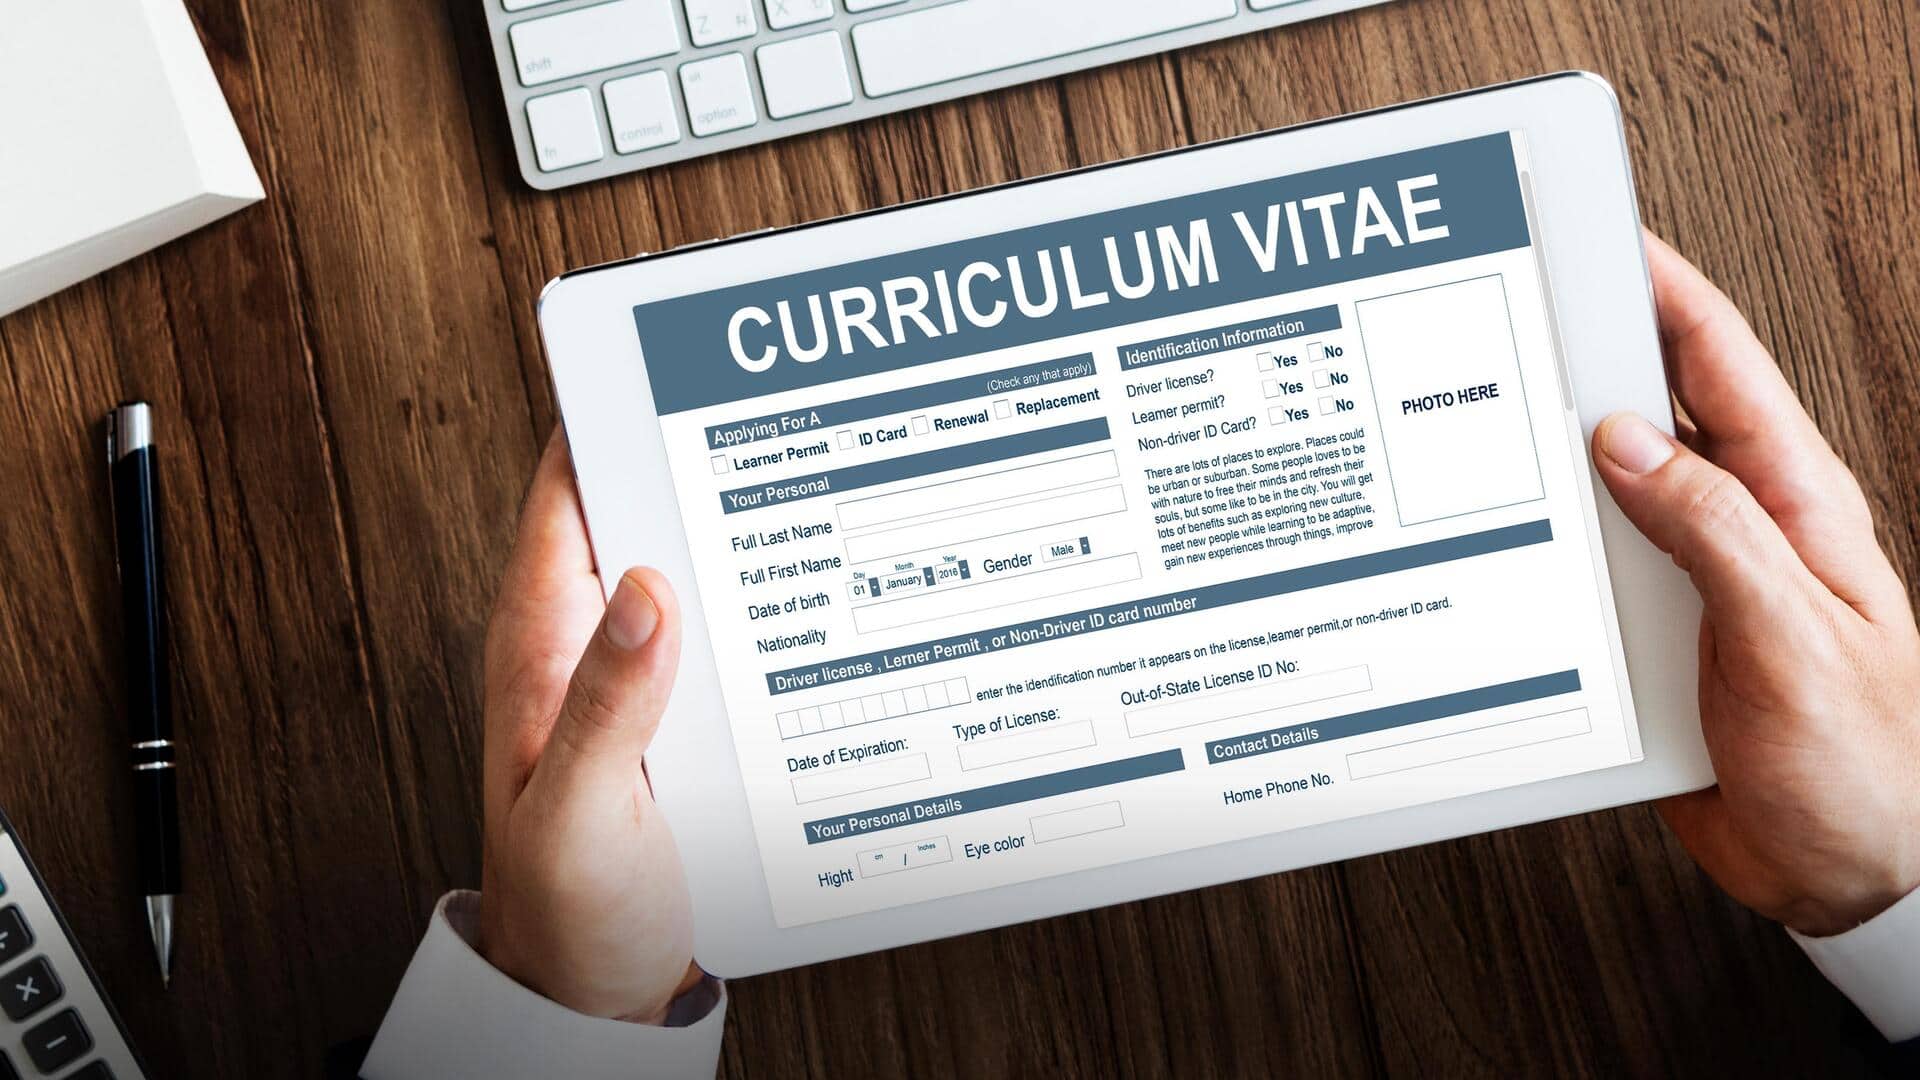 Want good resume? Use these popular online resume-making services